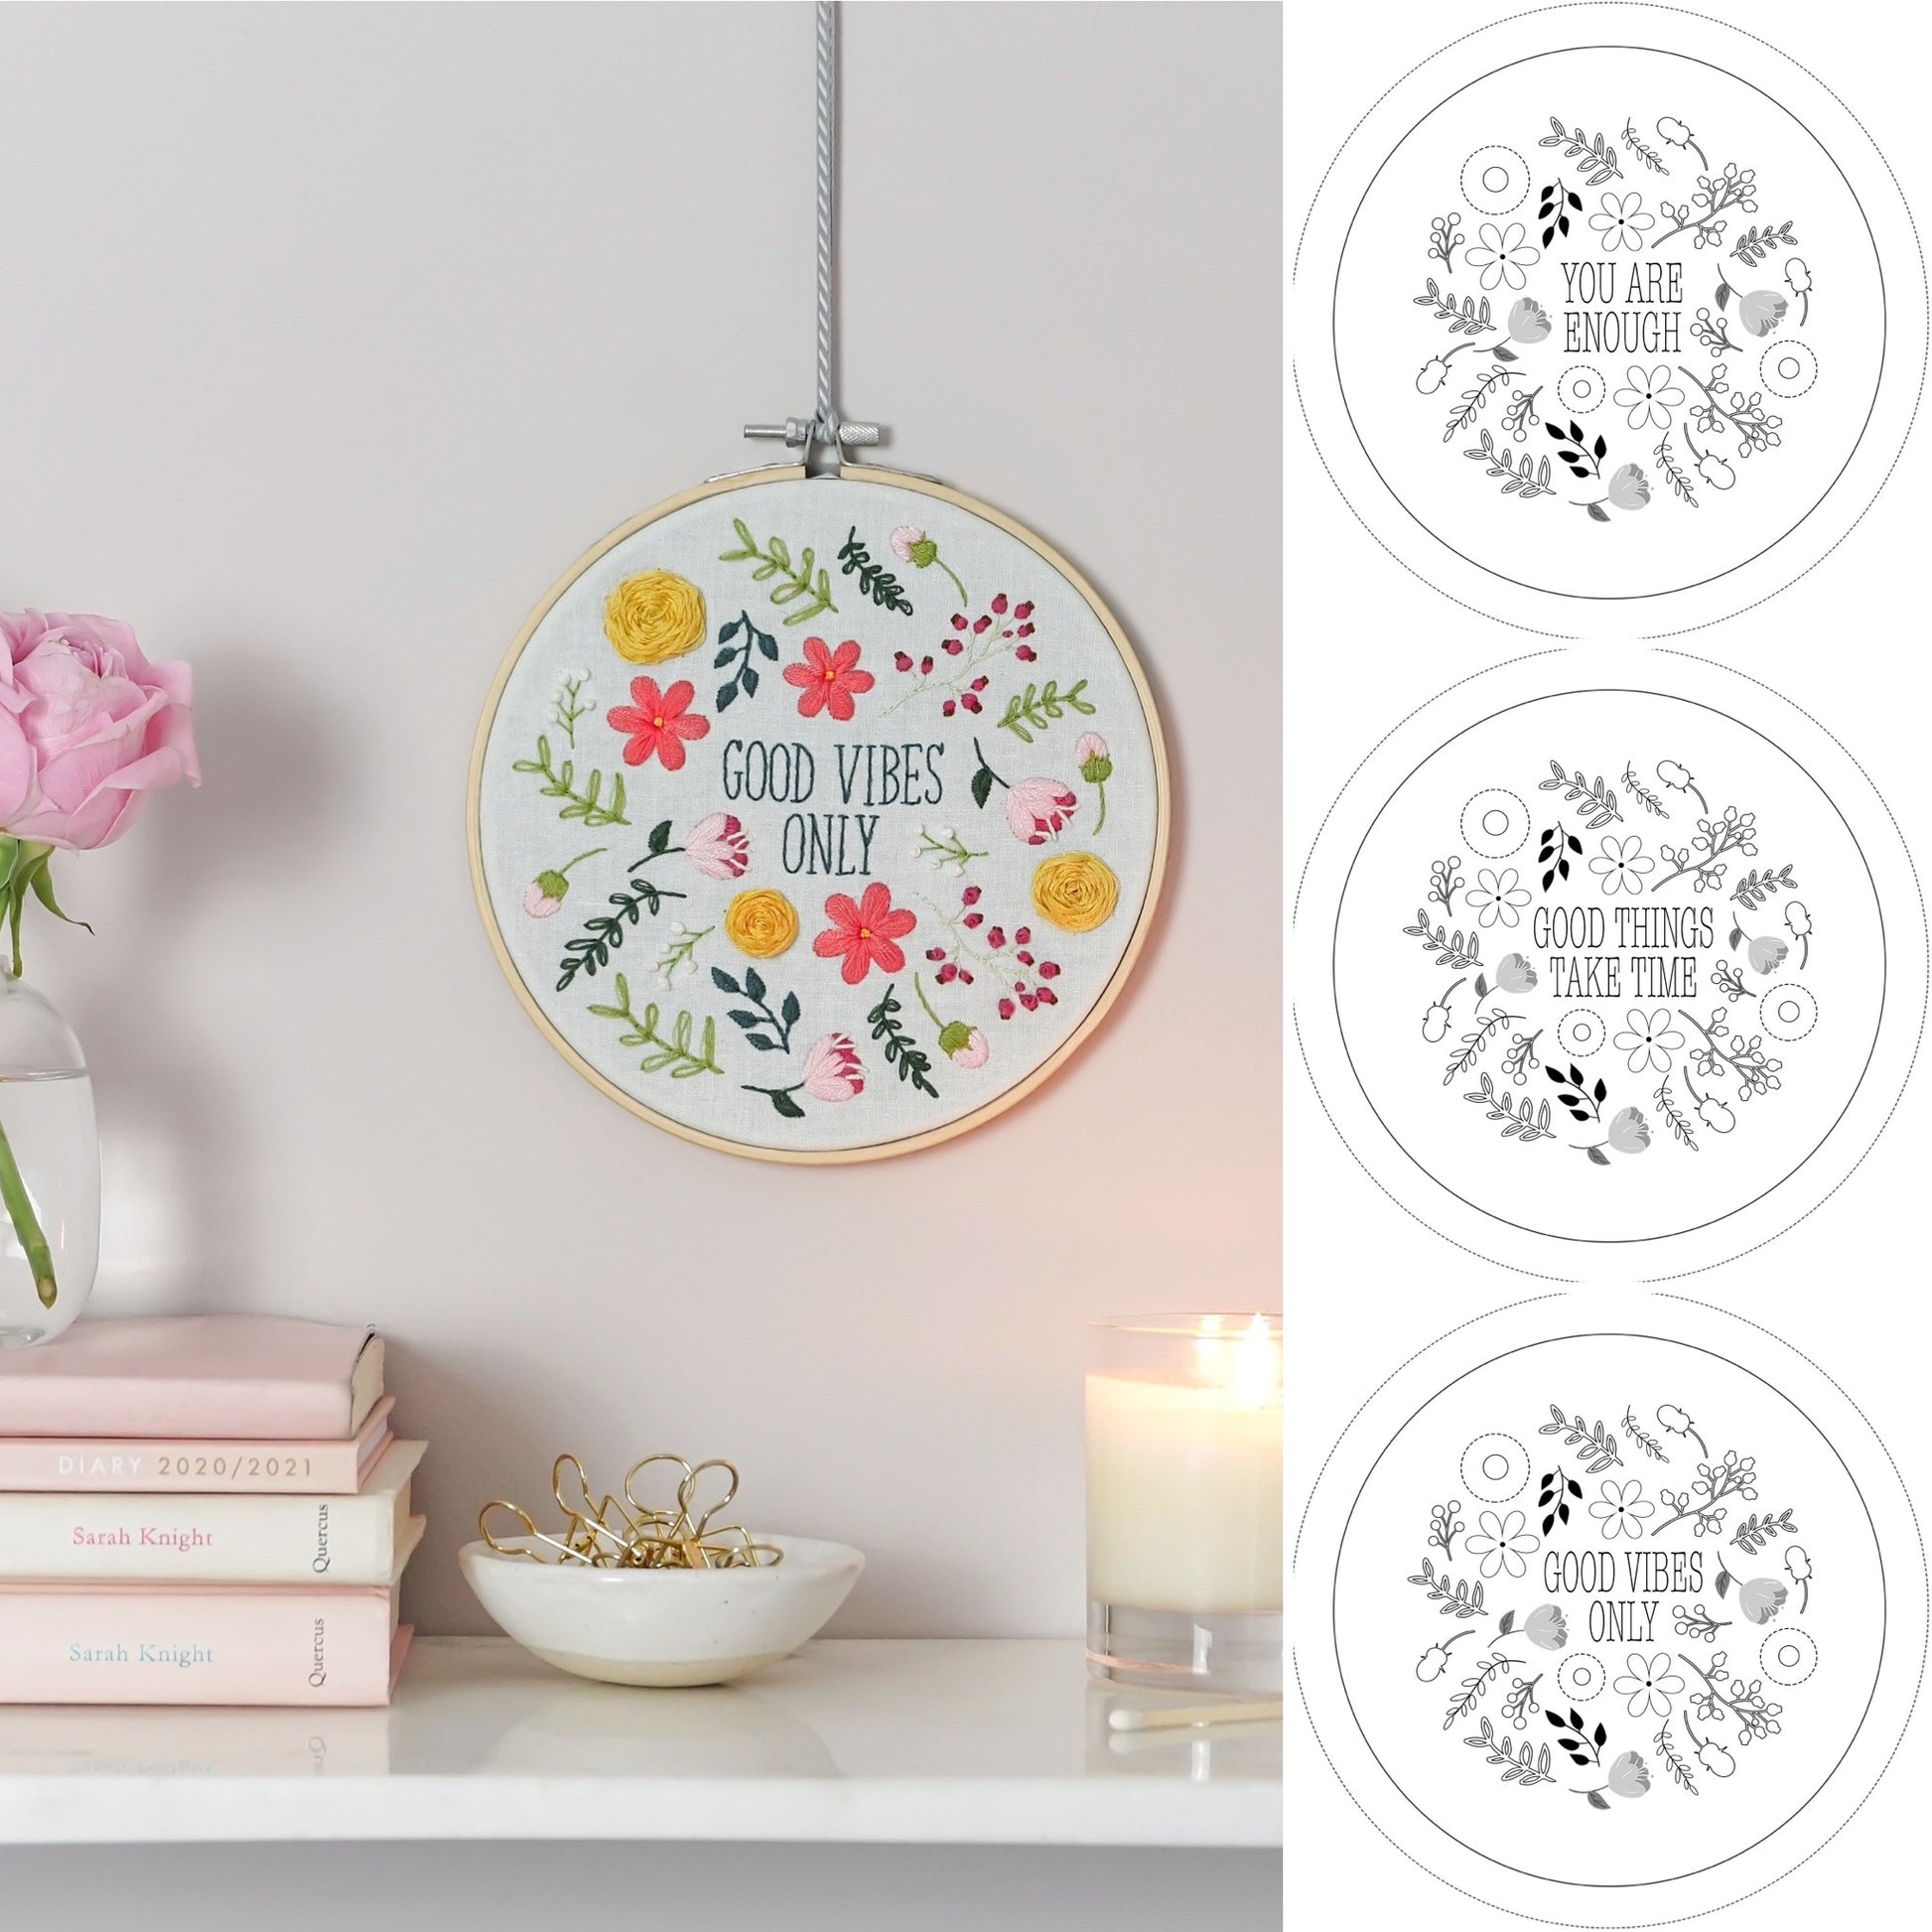 Personalised embroidery pattern